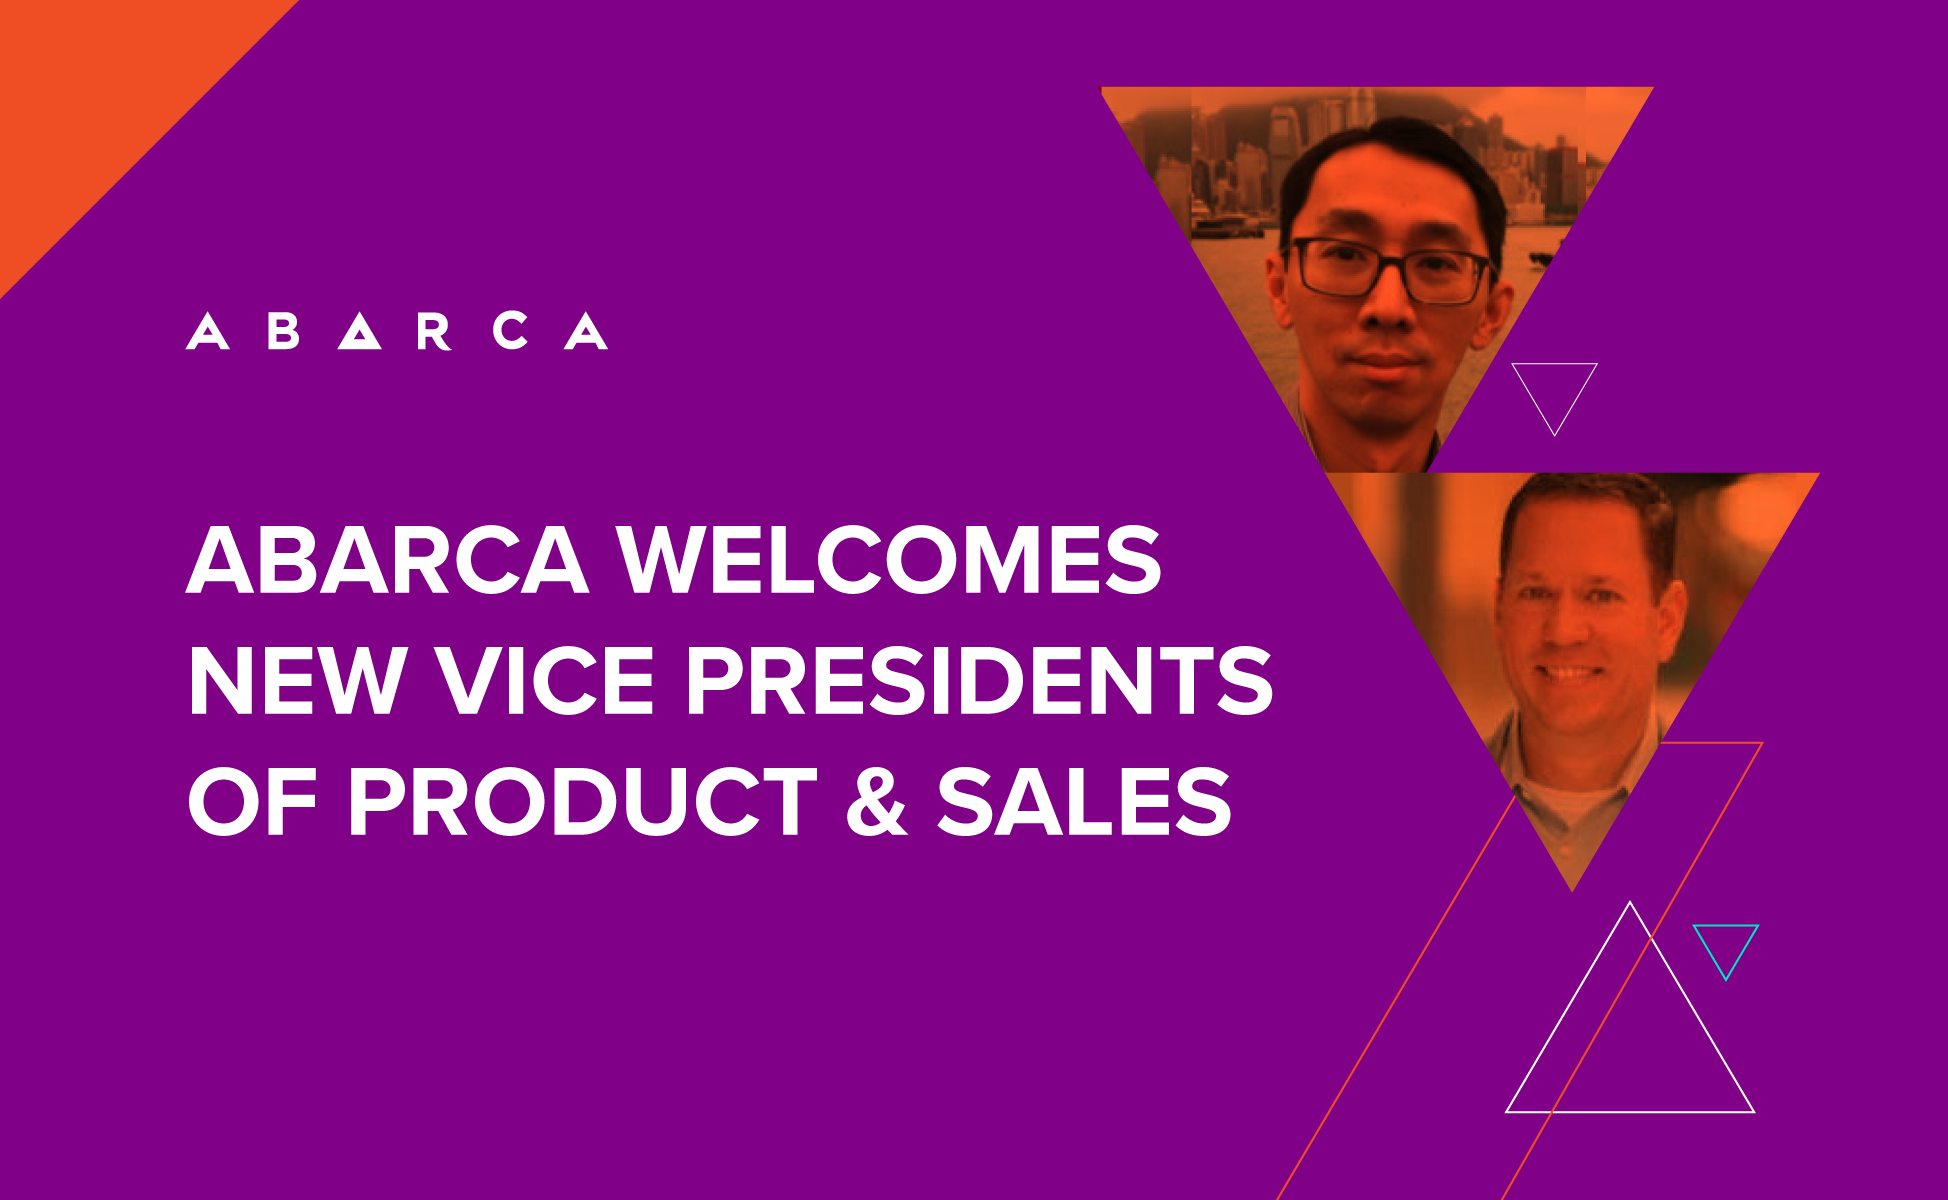 Abarca welcomes new Vice Presidents of Product and Sales: Paul Chan and Jesse Ruzicka.